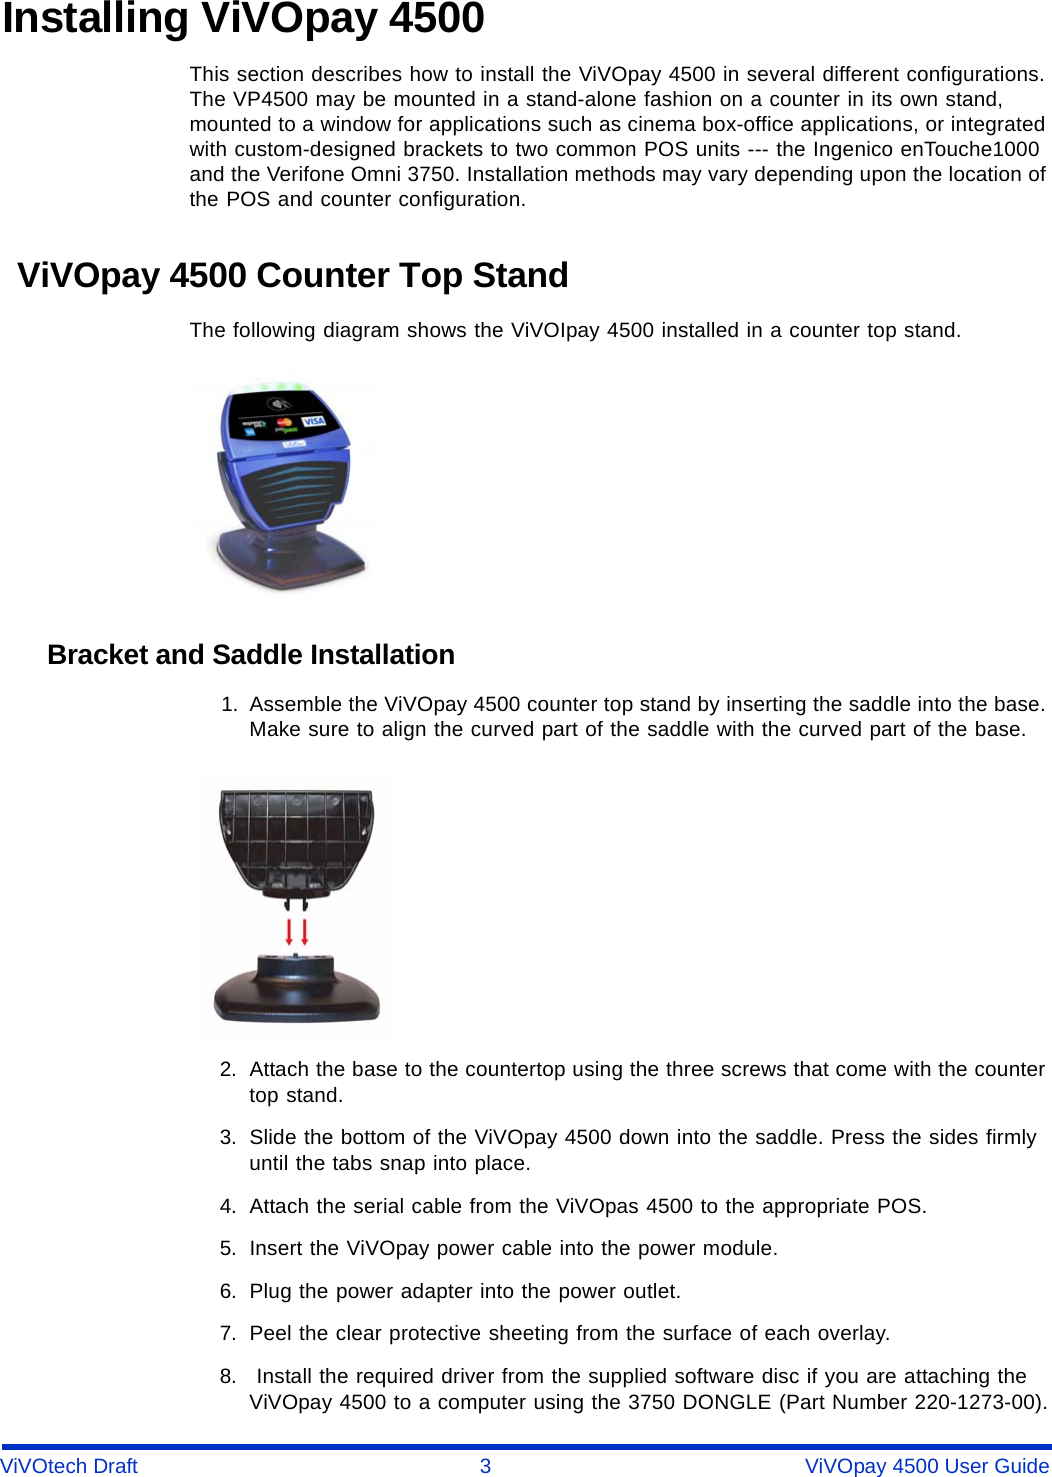 ViVOtech Draft 3 ViVOpay 4500 User GuideInstalling ViVOpay 4500This section describes how to install the ViVOpay 4500 in several different configurations. The VP4500 may be mounted in a stand-alone fashion on a counter in its own stand, mounted to a window for applications such as cinema box-office applications, or integrated with custom-designed brackets to two common POS units --- the Ingenico enTouche1000 and the Verifone Omni 3750. Installation methods may vary depending upon the location of the POS and counter configuration. ViVOpay 4500 Counter Top StandThe following diagram shows the ViVOIpay 4500 installed in a counter top stand.Bracket and Saddle Installation1. Assemble the ViVOpay 4500 counter top stand by inserting the saddle into the base. Make sure to align the curved part of the saddle with the curved part of the base.2. Attach the base to the countertop using the three screws that come with the counter top stand.3. Slide the bottom of the ViVOpay 4500 down into the saddle. Press the sides firmly until the tabs snap into place.4. Attach the serial cable from the ViVOpas 4500 to the appropriate POS.5. Insert the ViVOpay power cable into the power module.6. Plug the power adapter into the power outlet.7. Peel the clear protective sheeting from the surface of each overlay.8.  Install the required driver from the supplied software disc if you are attaching the ViVOpay 4500 to a computer using the 3750 DONGLE (Part Number 220-1273-00).